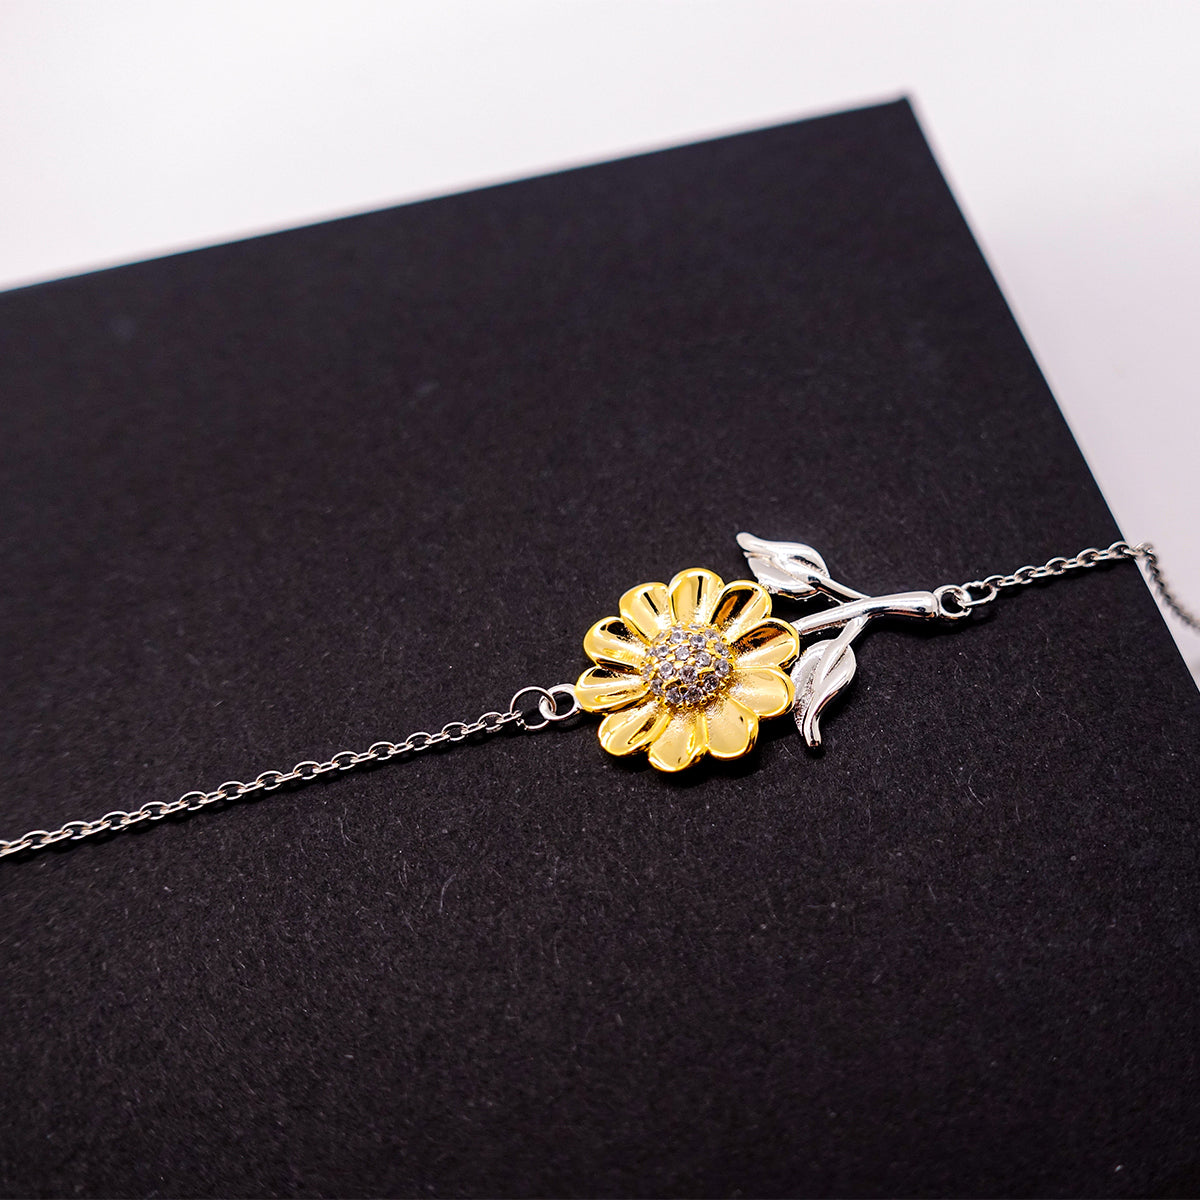 Abuelo Sunflower Bracelet - Always in My Heart - Unique Gift for Grandfather on Birthday, Christmas, or Graduation - Engraved Confidence and Hope